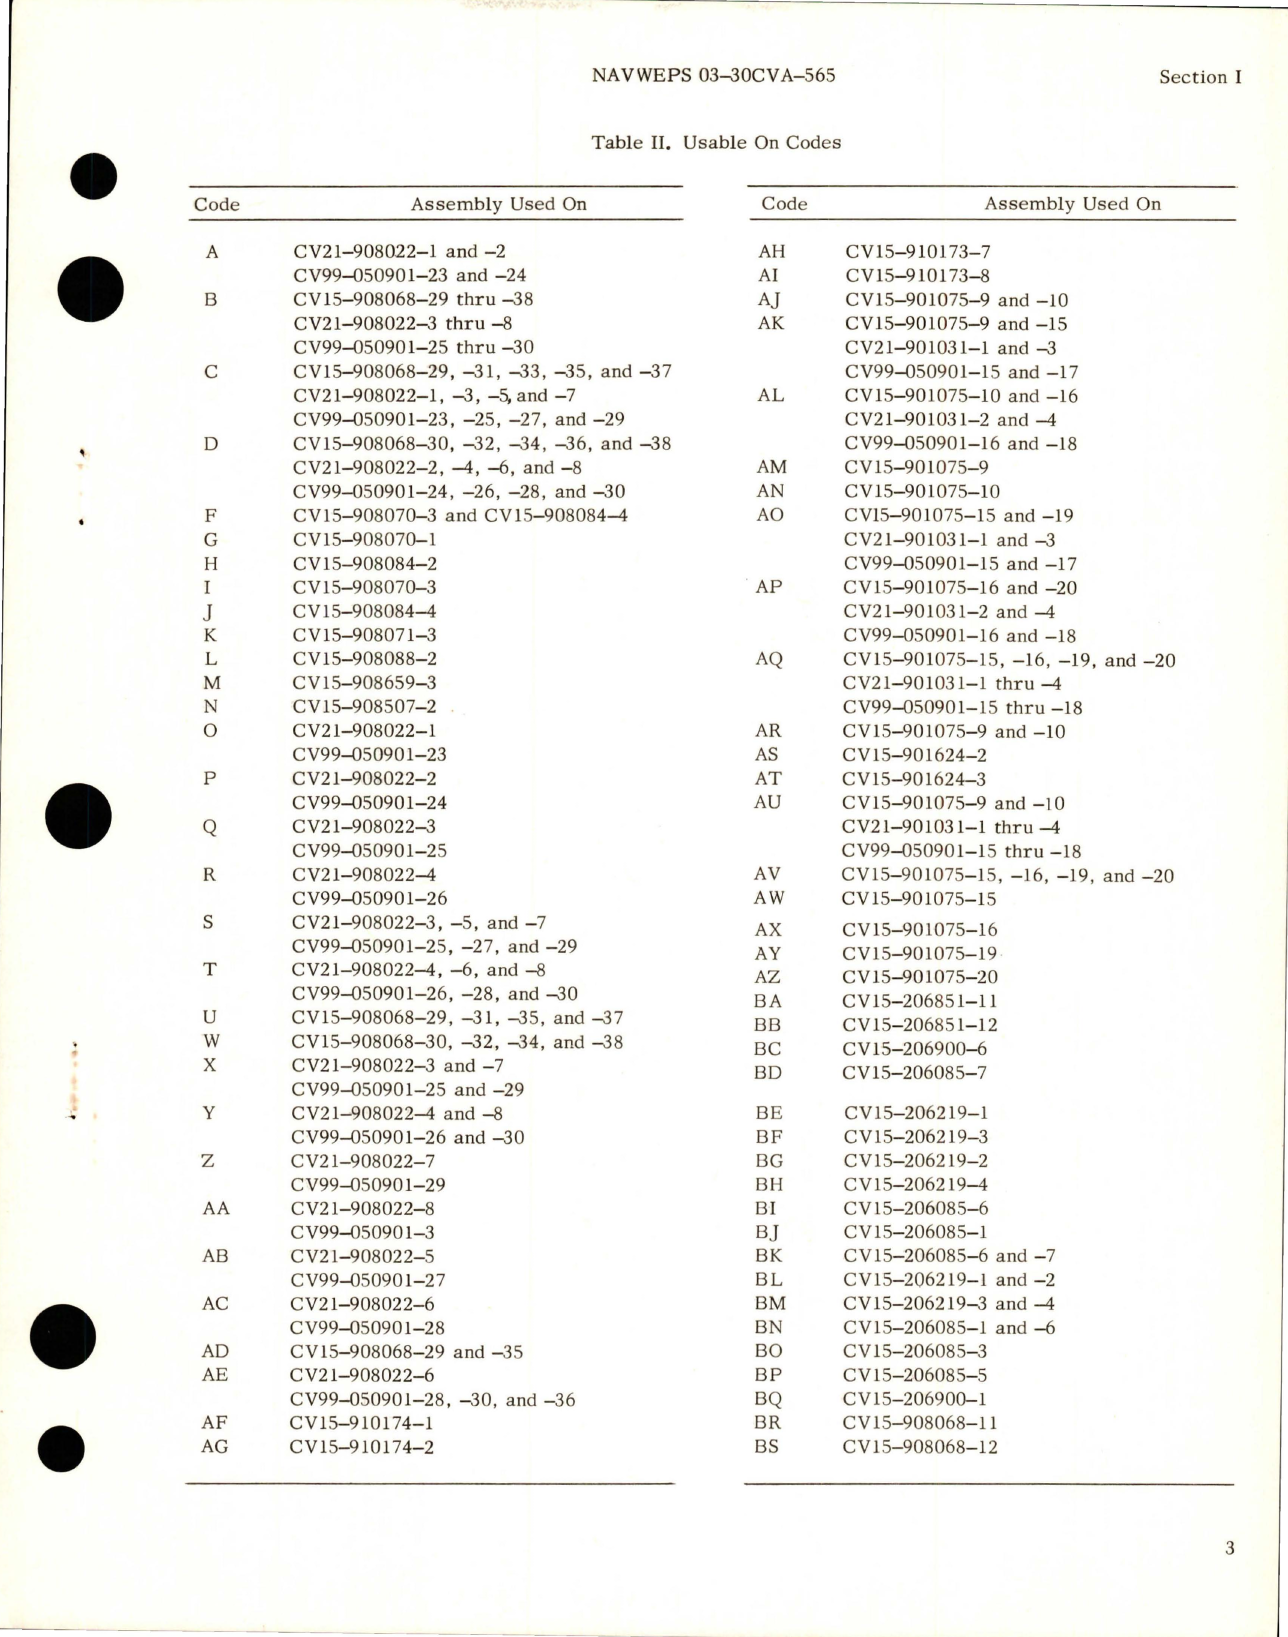 Sample page 5 from AirCorps Library document: Illustrated Parts Breakdown for Aileron and Spoiler Power Control and Cylinder Assemblies, Rigging and Synchronization Fixtures